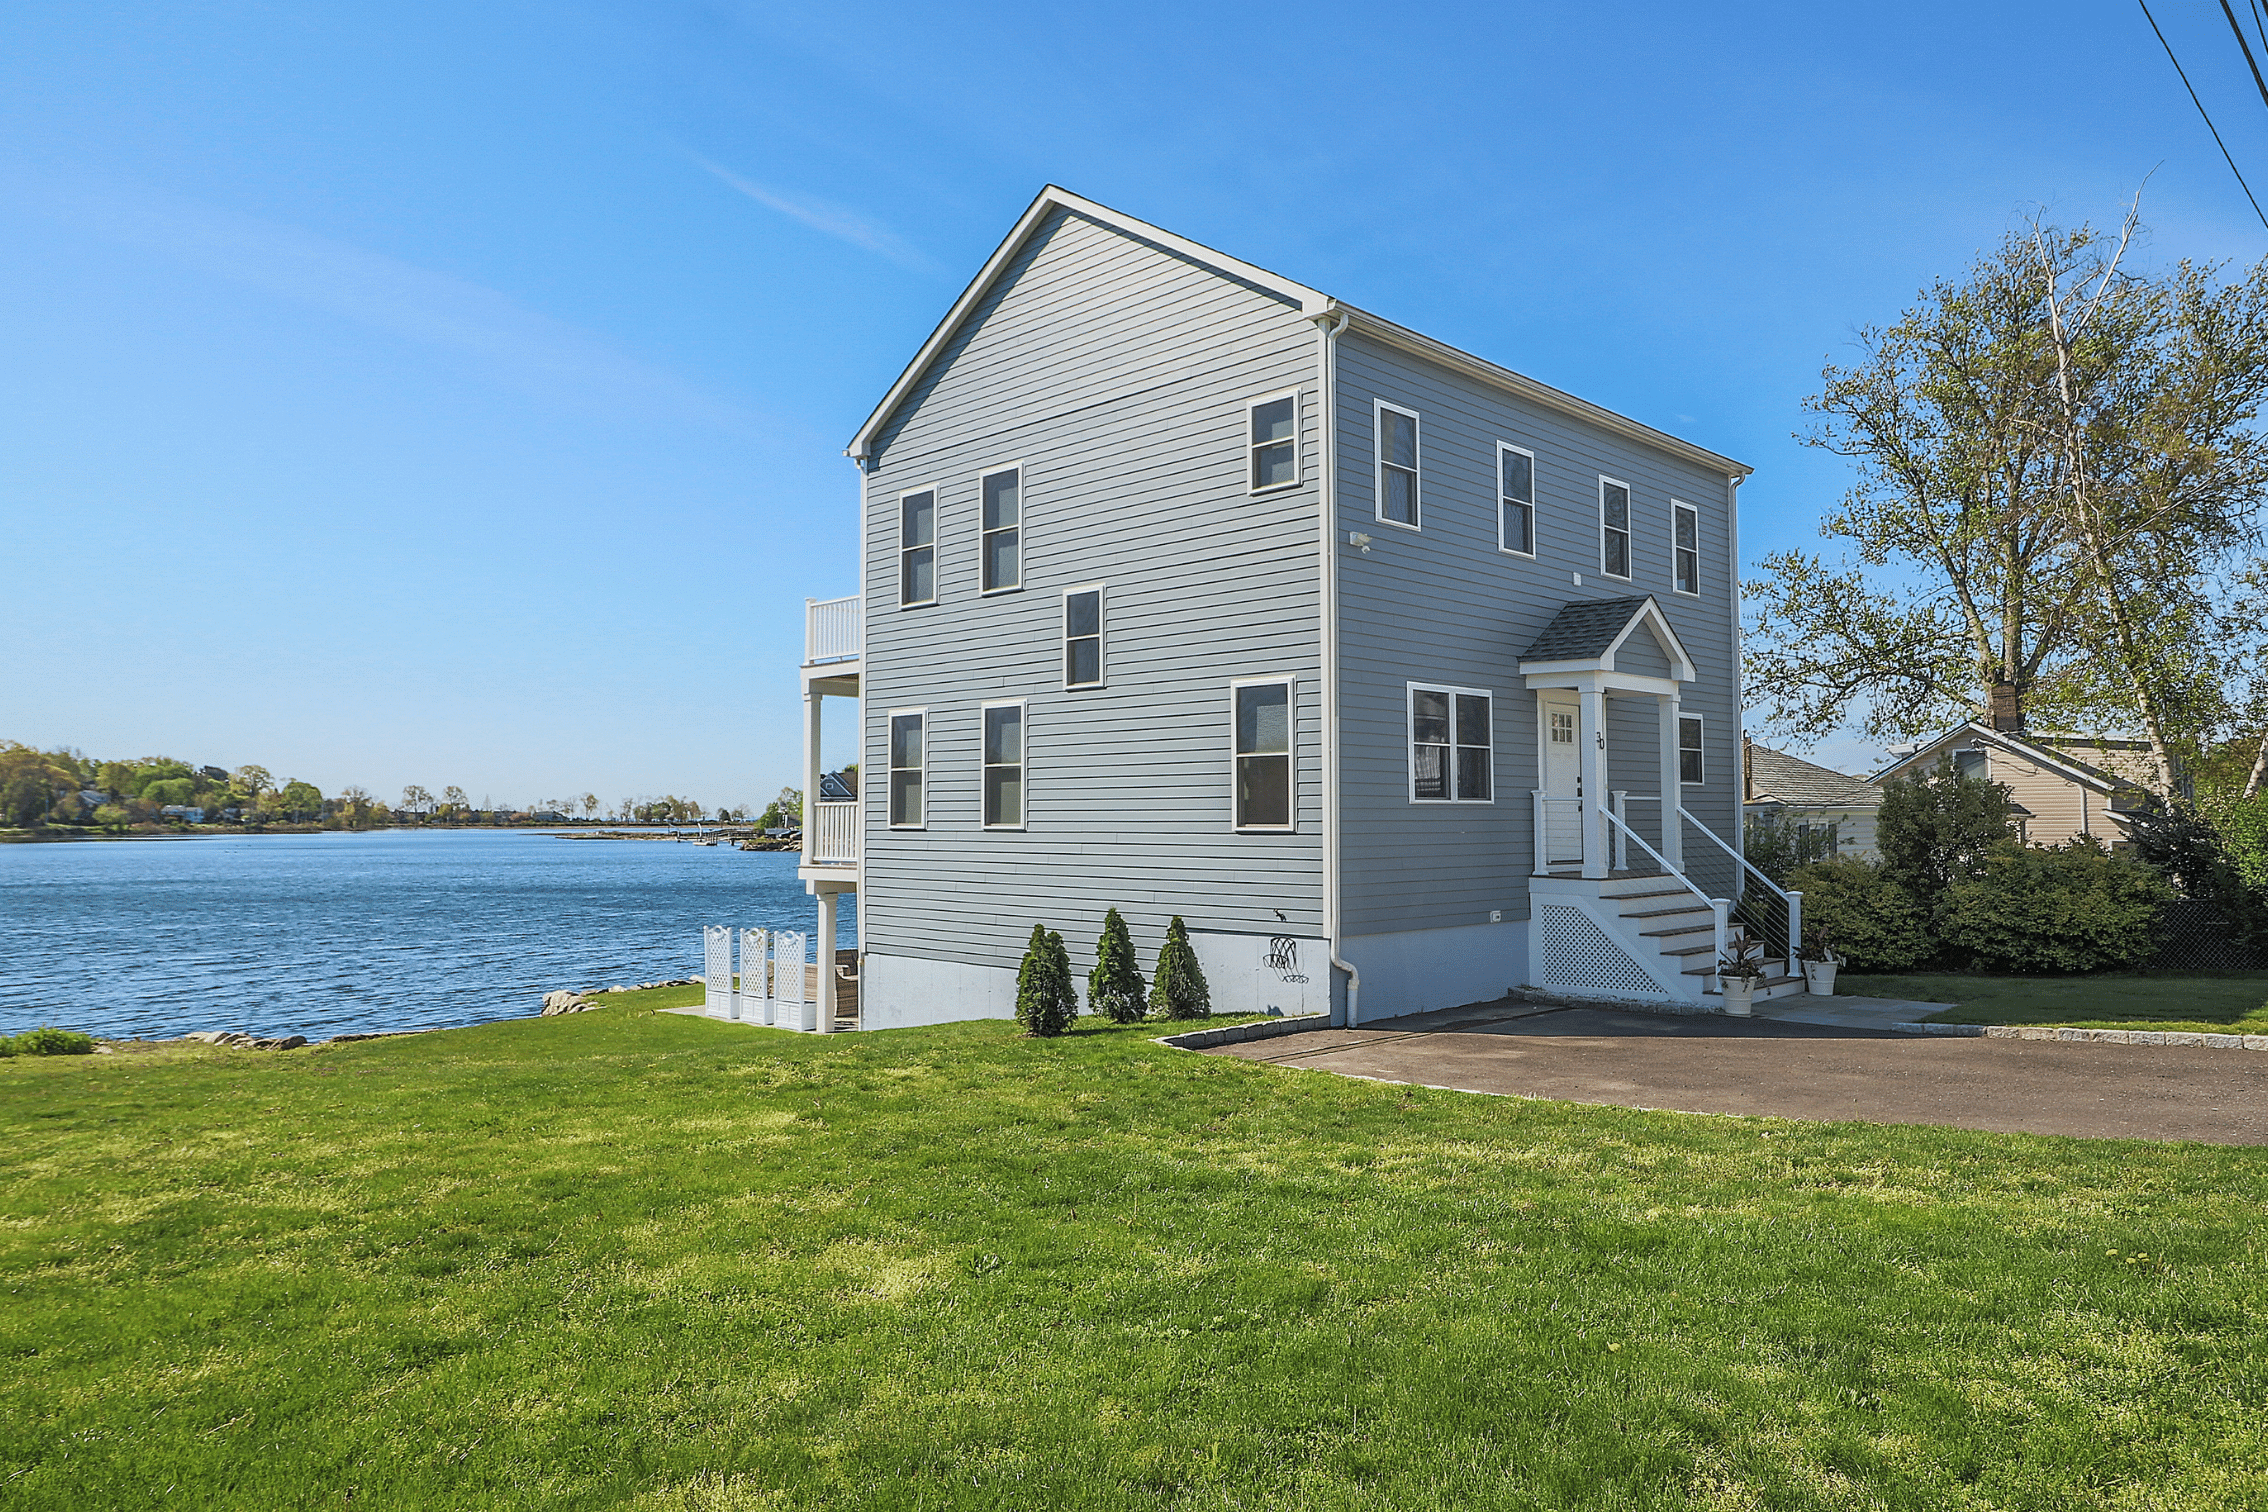 House On The Water Connecticut Build and Design